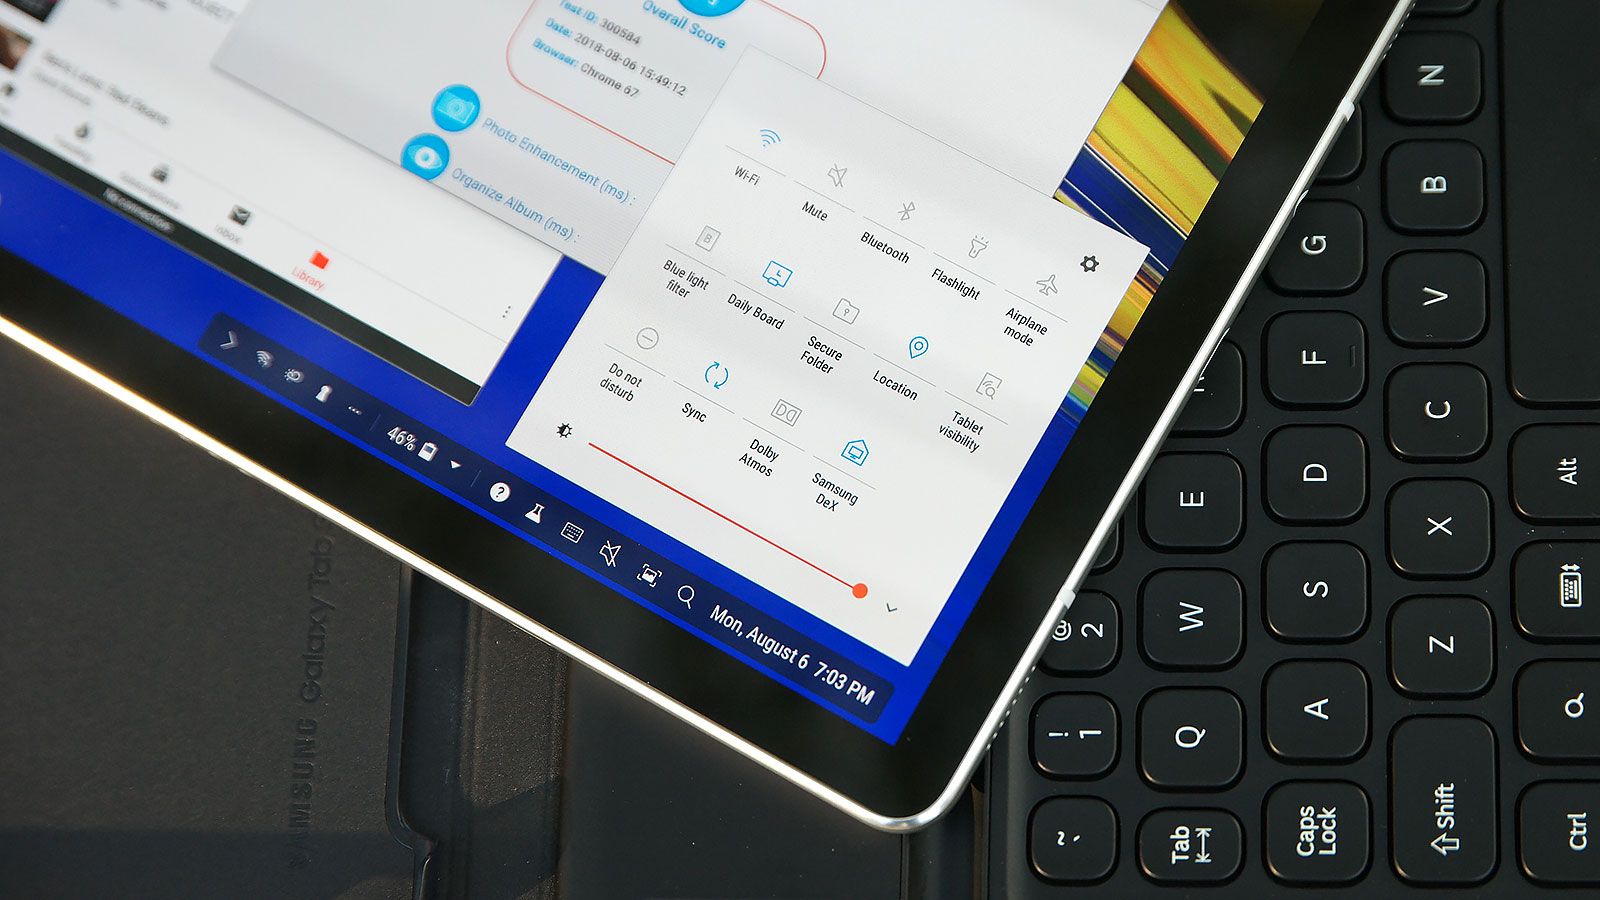 How Two Big Things Stopped The Samsung Galaxy Tab S4 From Winning Me Over